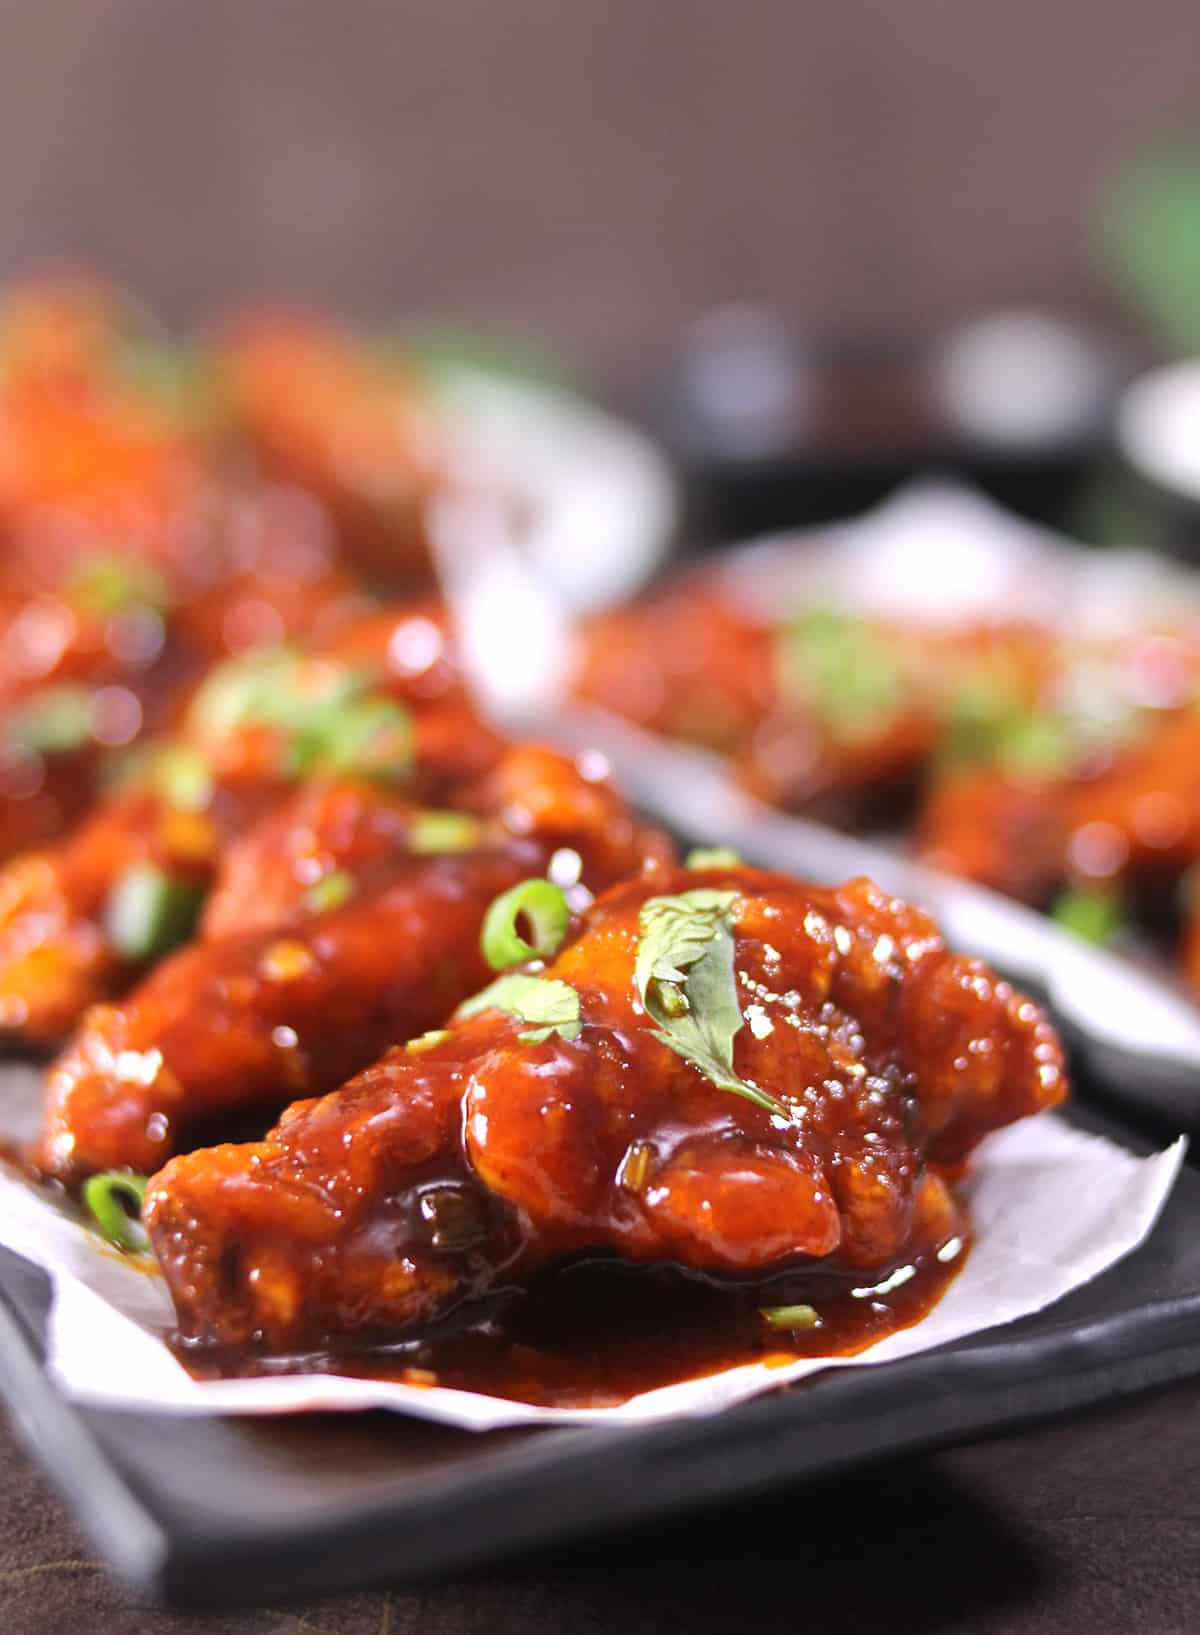 Chicken wings baked popular super wings game day party food idea with sticky sauce 